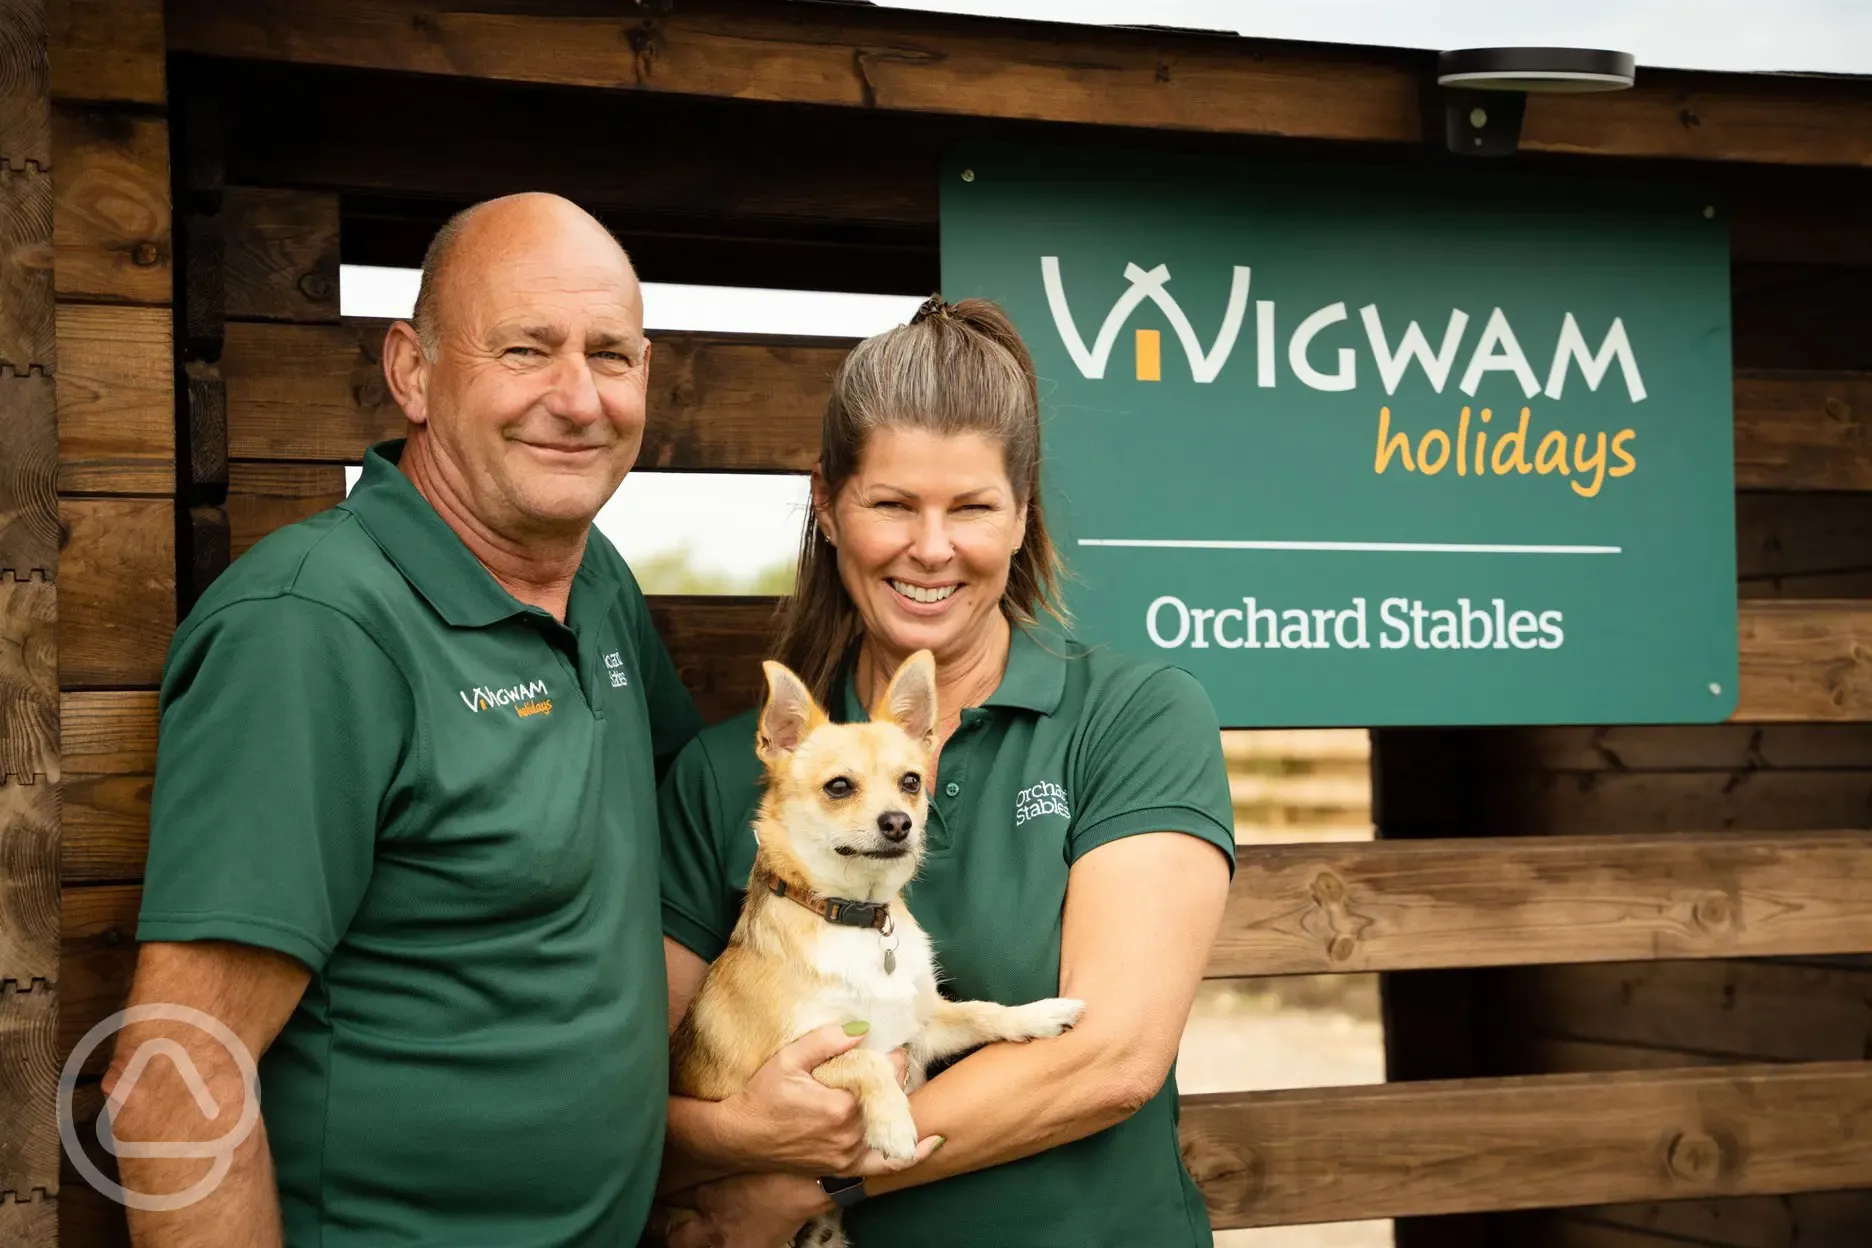 Wigwam Holidays Orchard Stables team